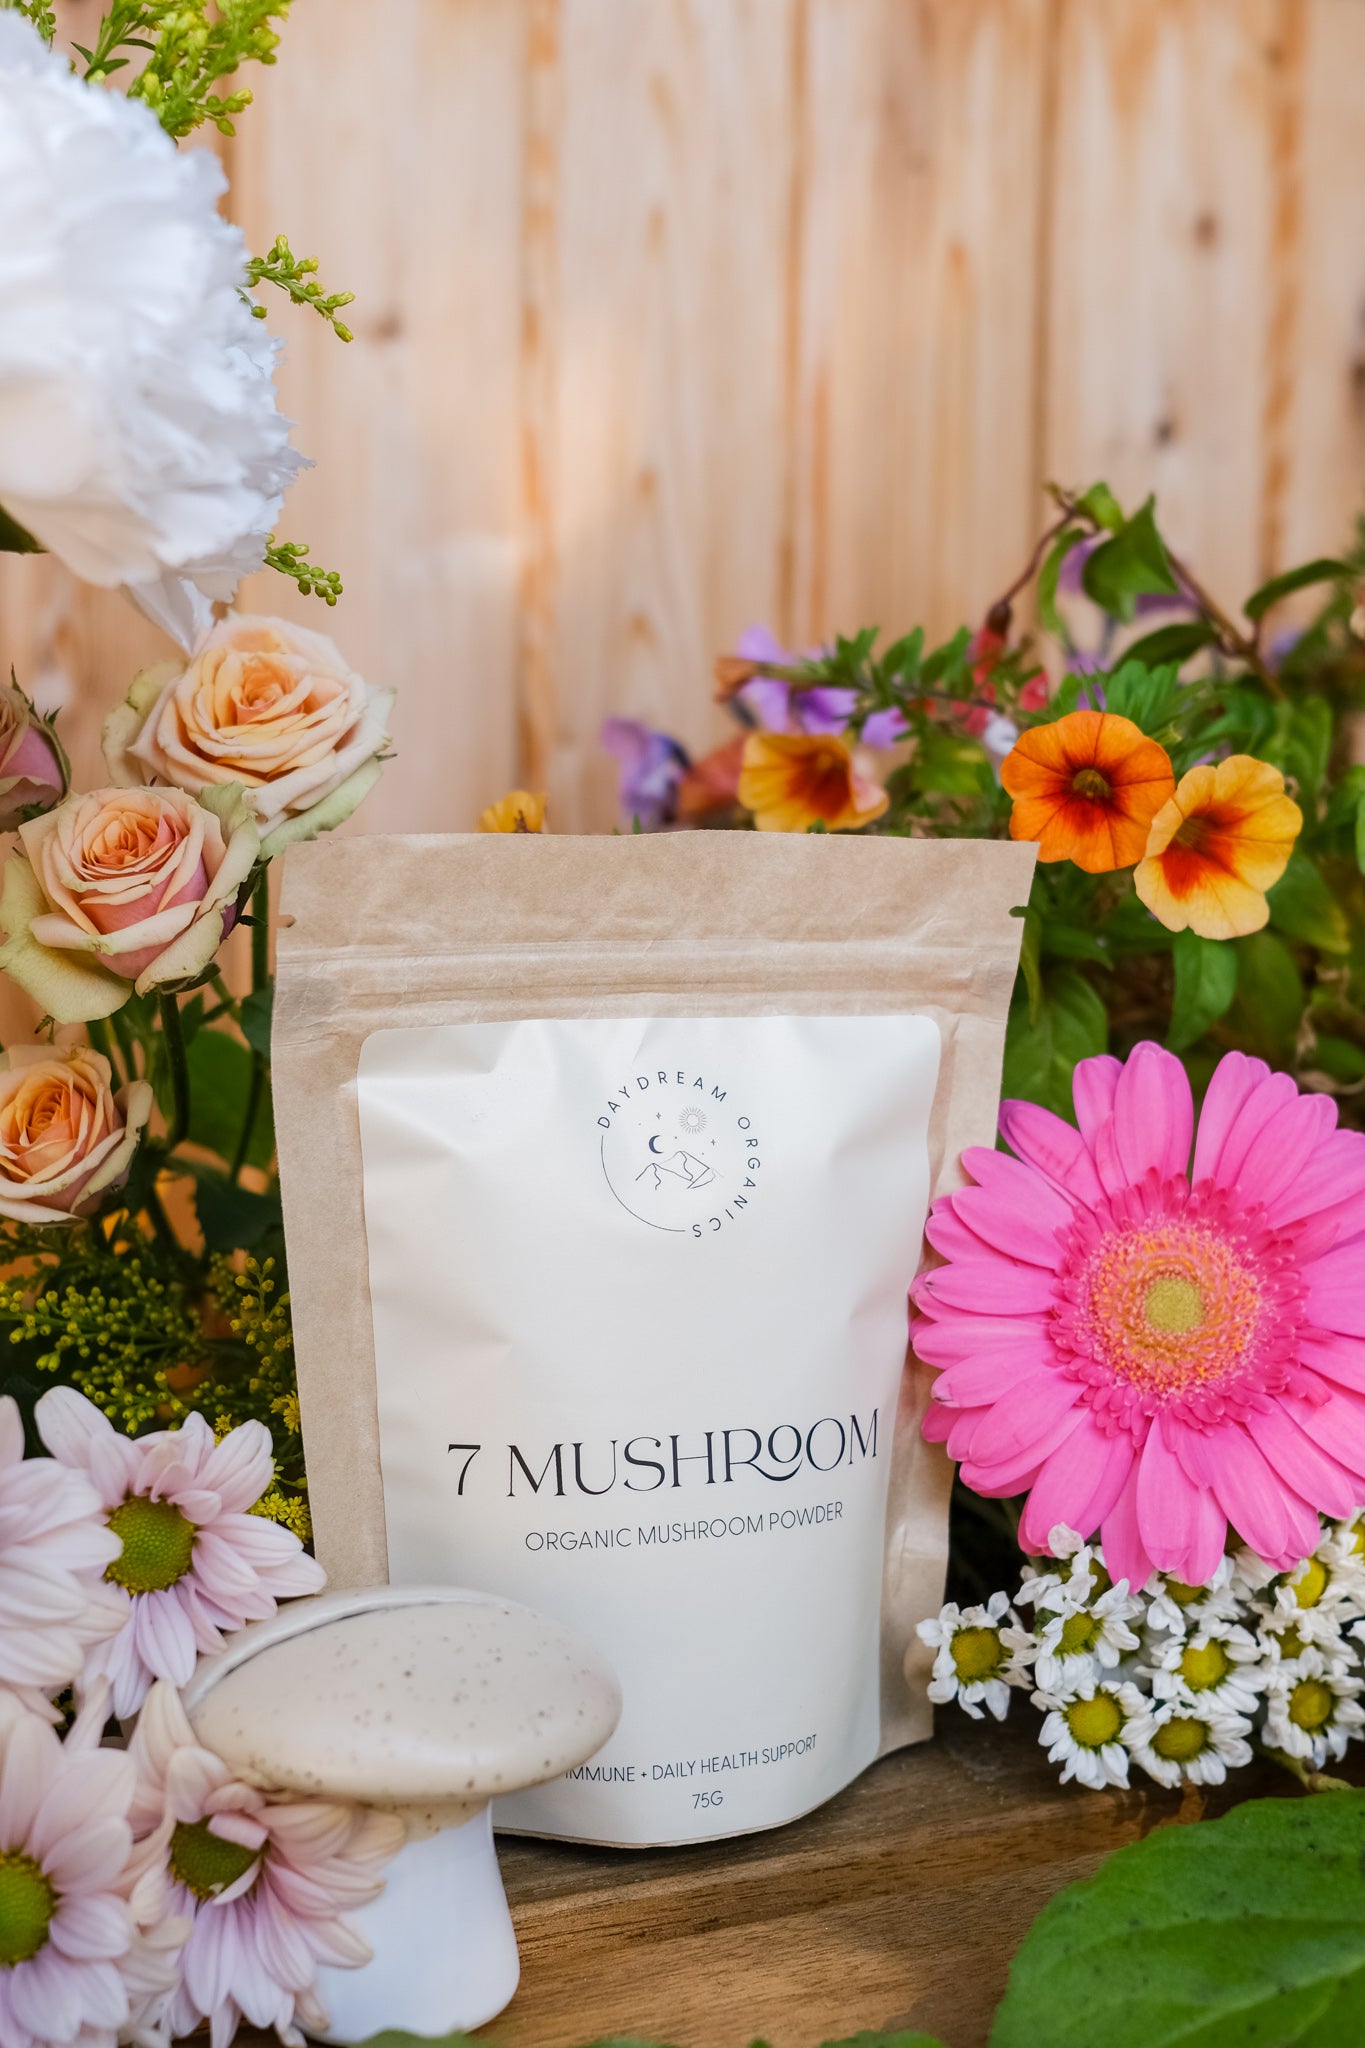 Our organic 7 Mushroom blend powder can be used as a source of antioxidants and to strengthen and modulate the immune system enhancing overall, daily health and wellbeing. 